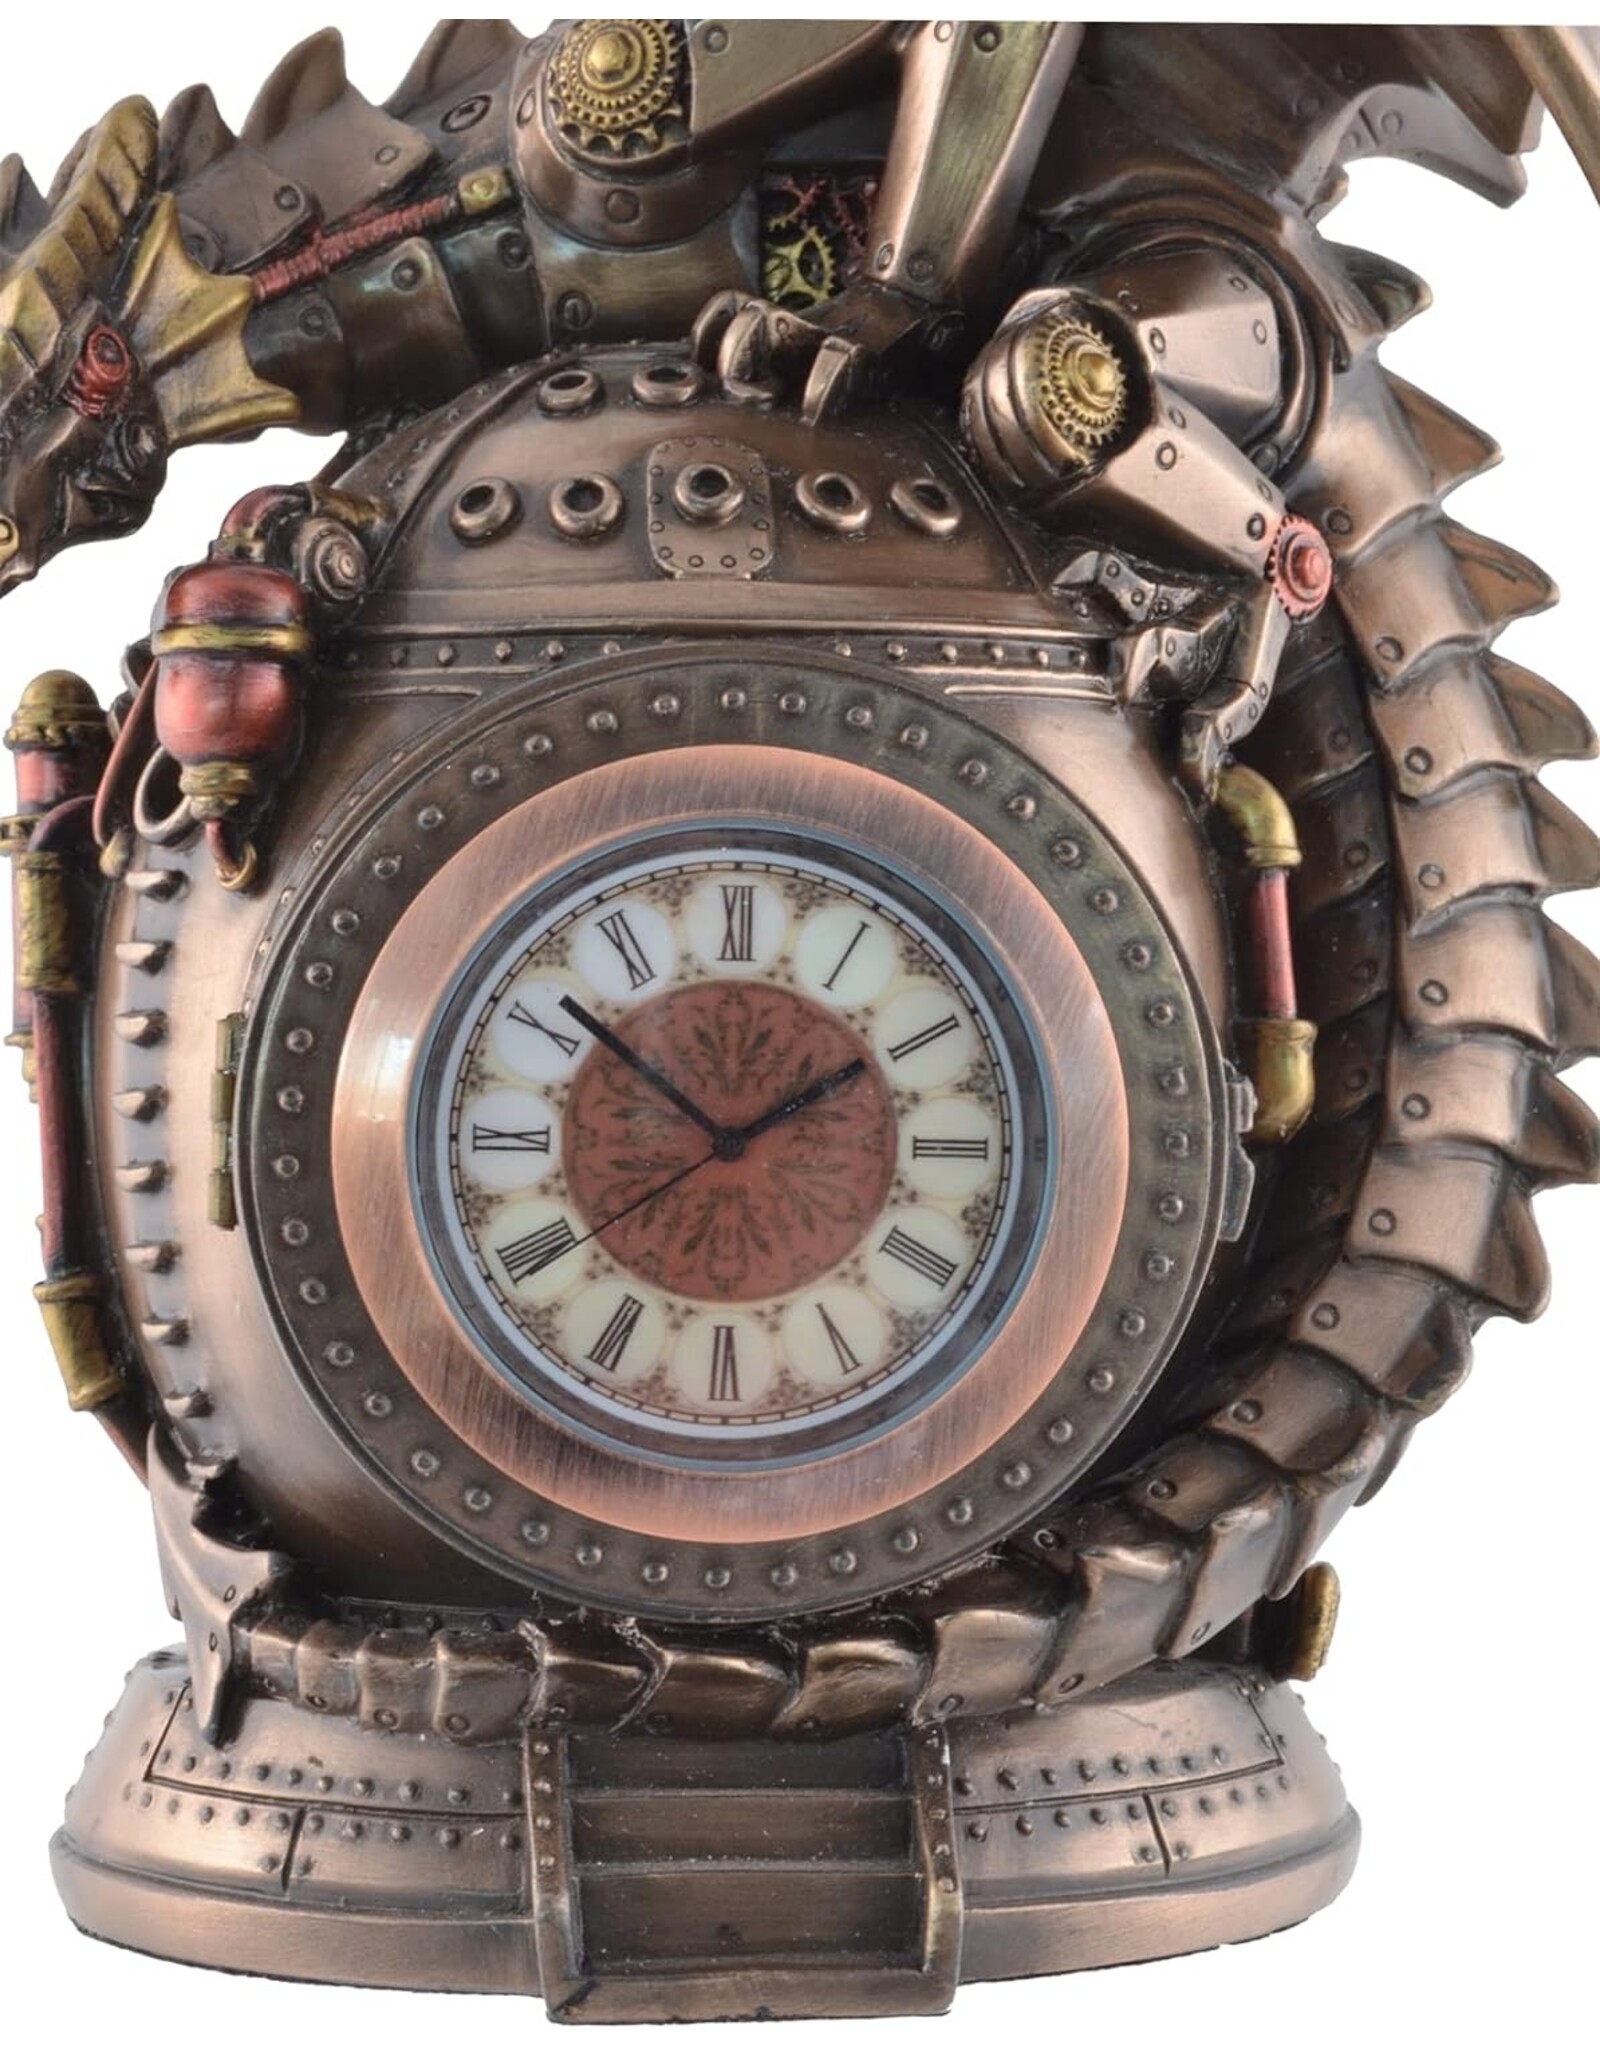 Veronese Design Giftware & Lifestyle - Steampunk Dragon on the Time Machine with Clock Veronese Design